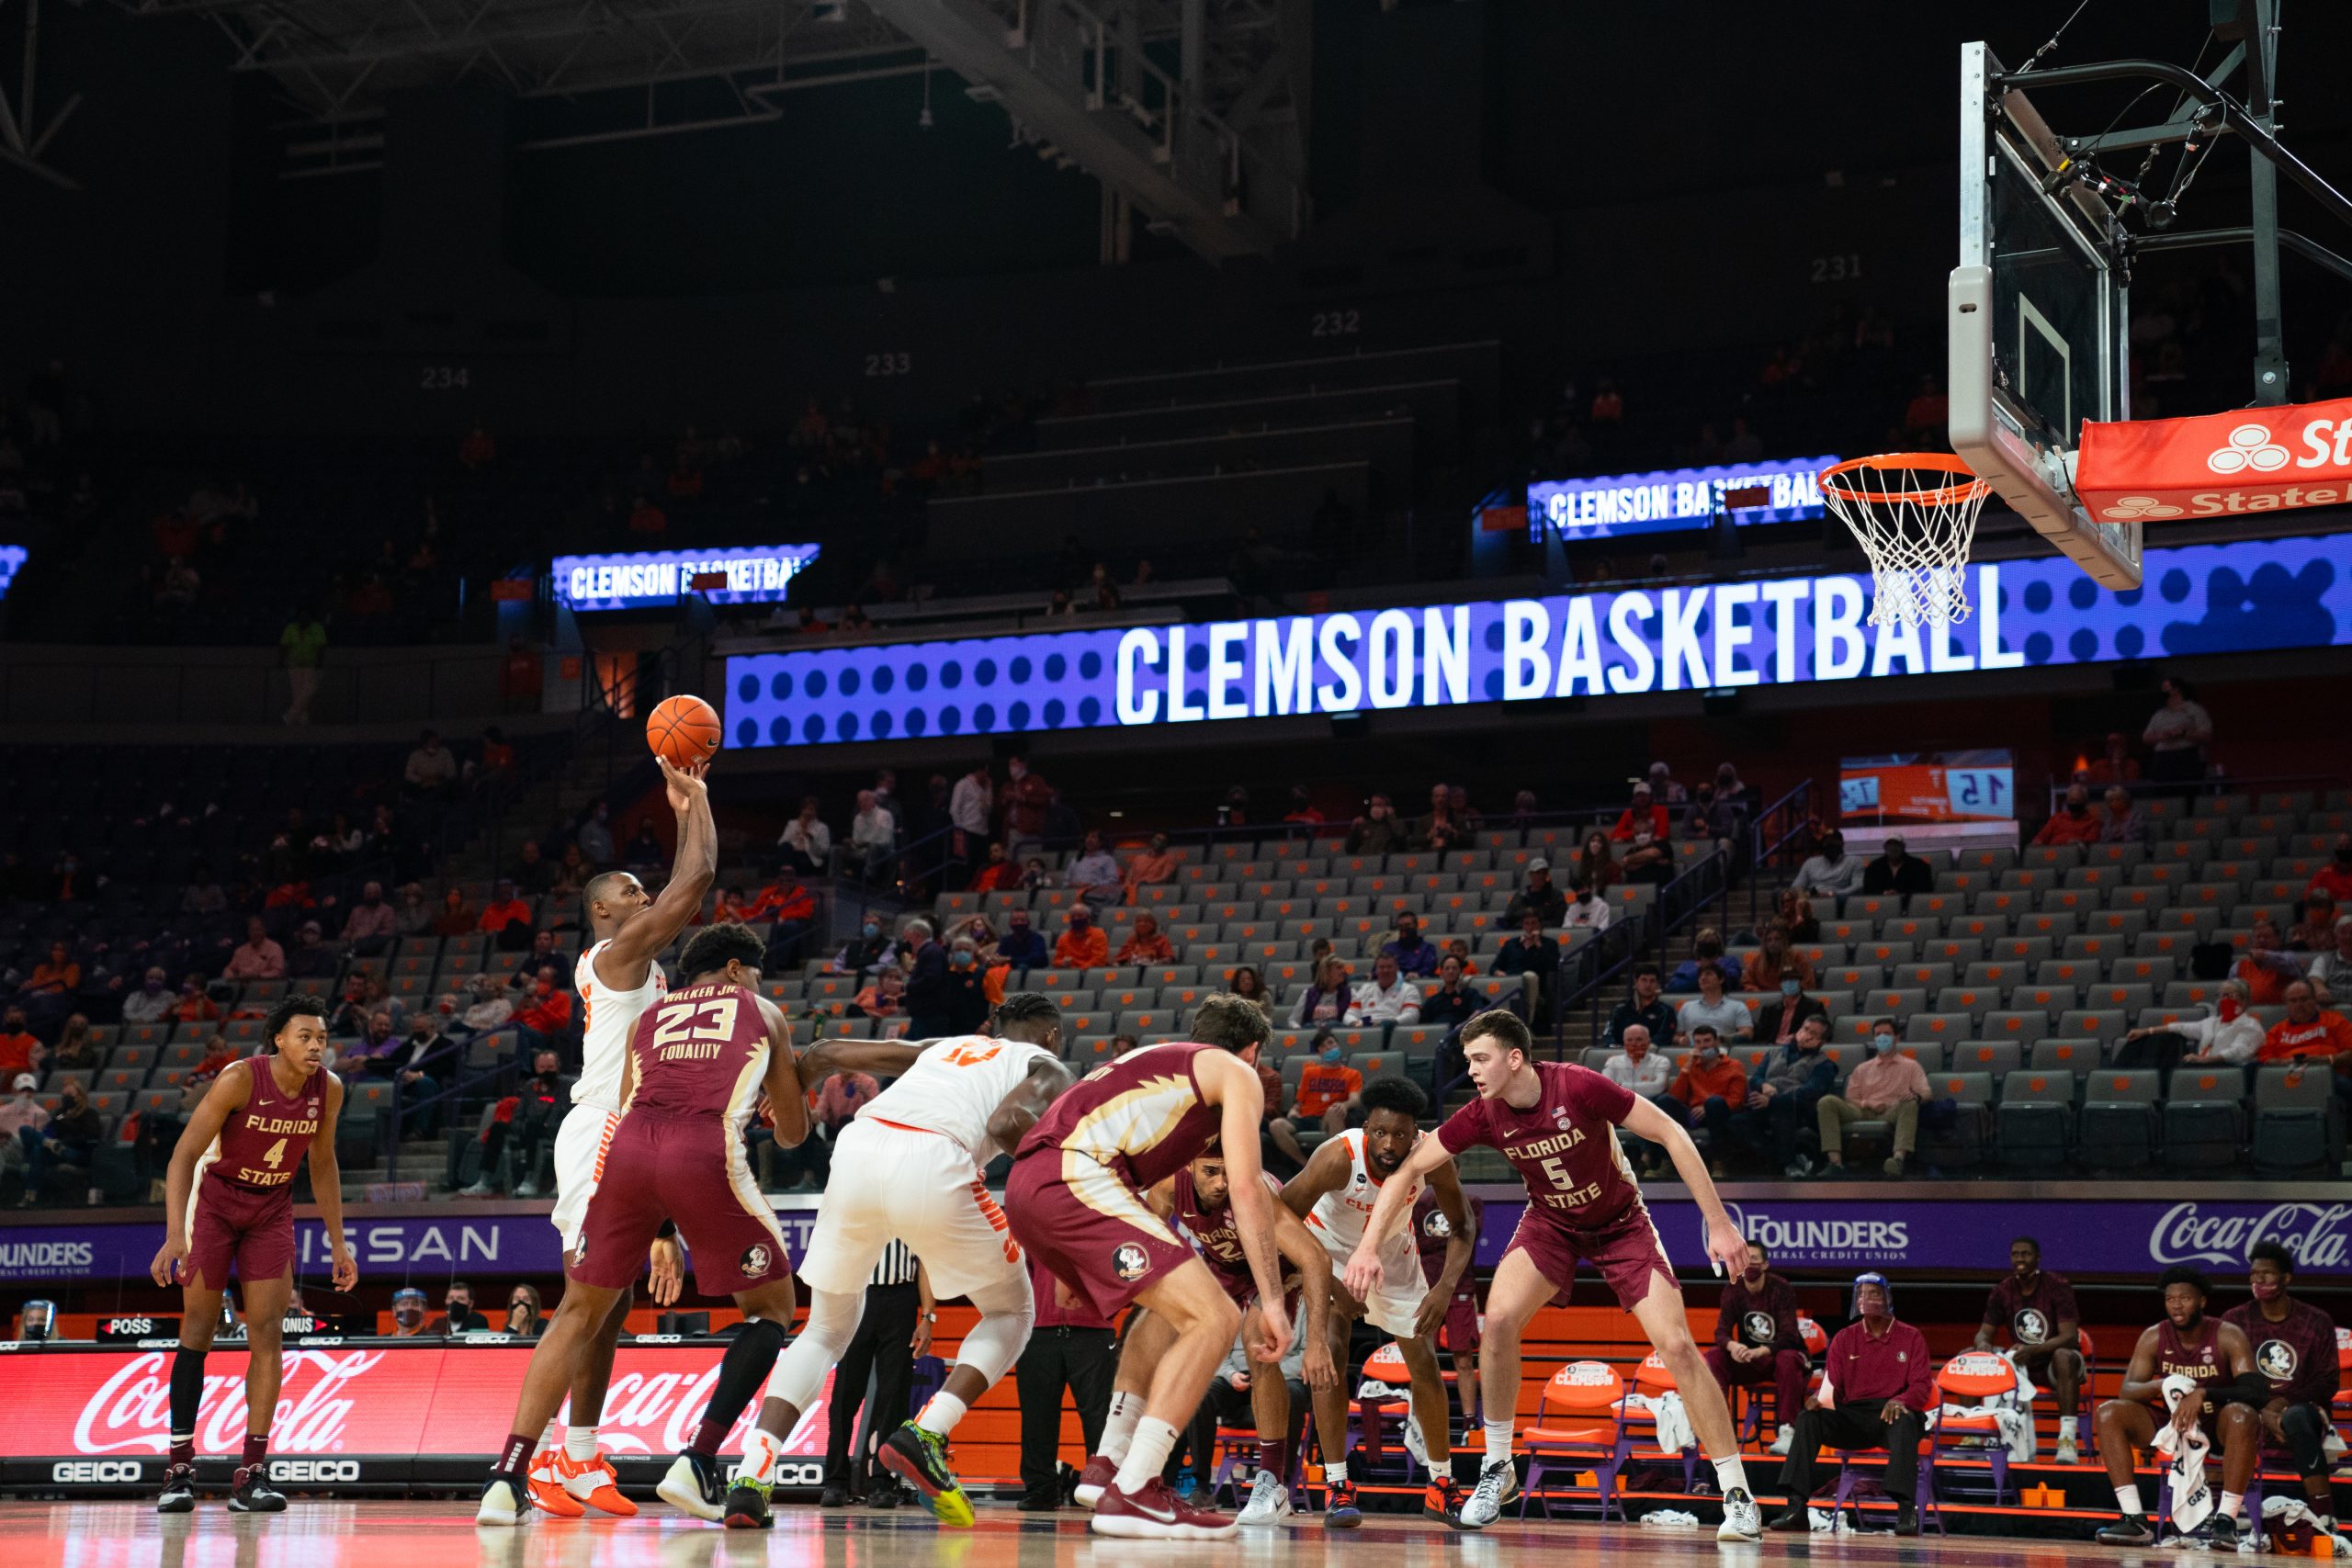 In the 2019 fiscal year, the Clemson Tigers’ total athletic revenues was $133.8 million and total expenses were $131.9 million. They are projecting full football capacity in the fall and therefore expect revenues to return to close to FY18-19 levels. Clemson basketball star Aamir Simms shoots a free throw on Dec. 29, 2020, against Florida State. Photography courtesy of David Platt, Clemson Athletics